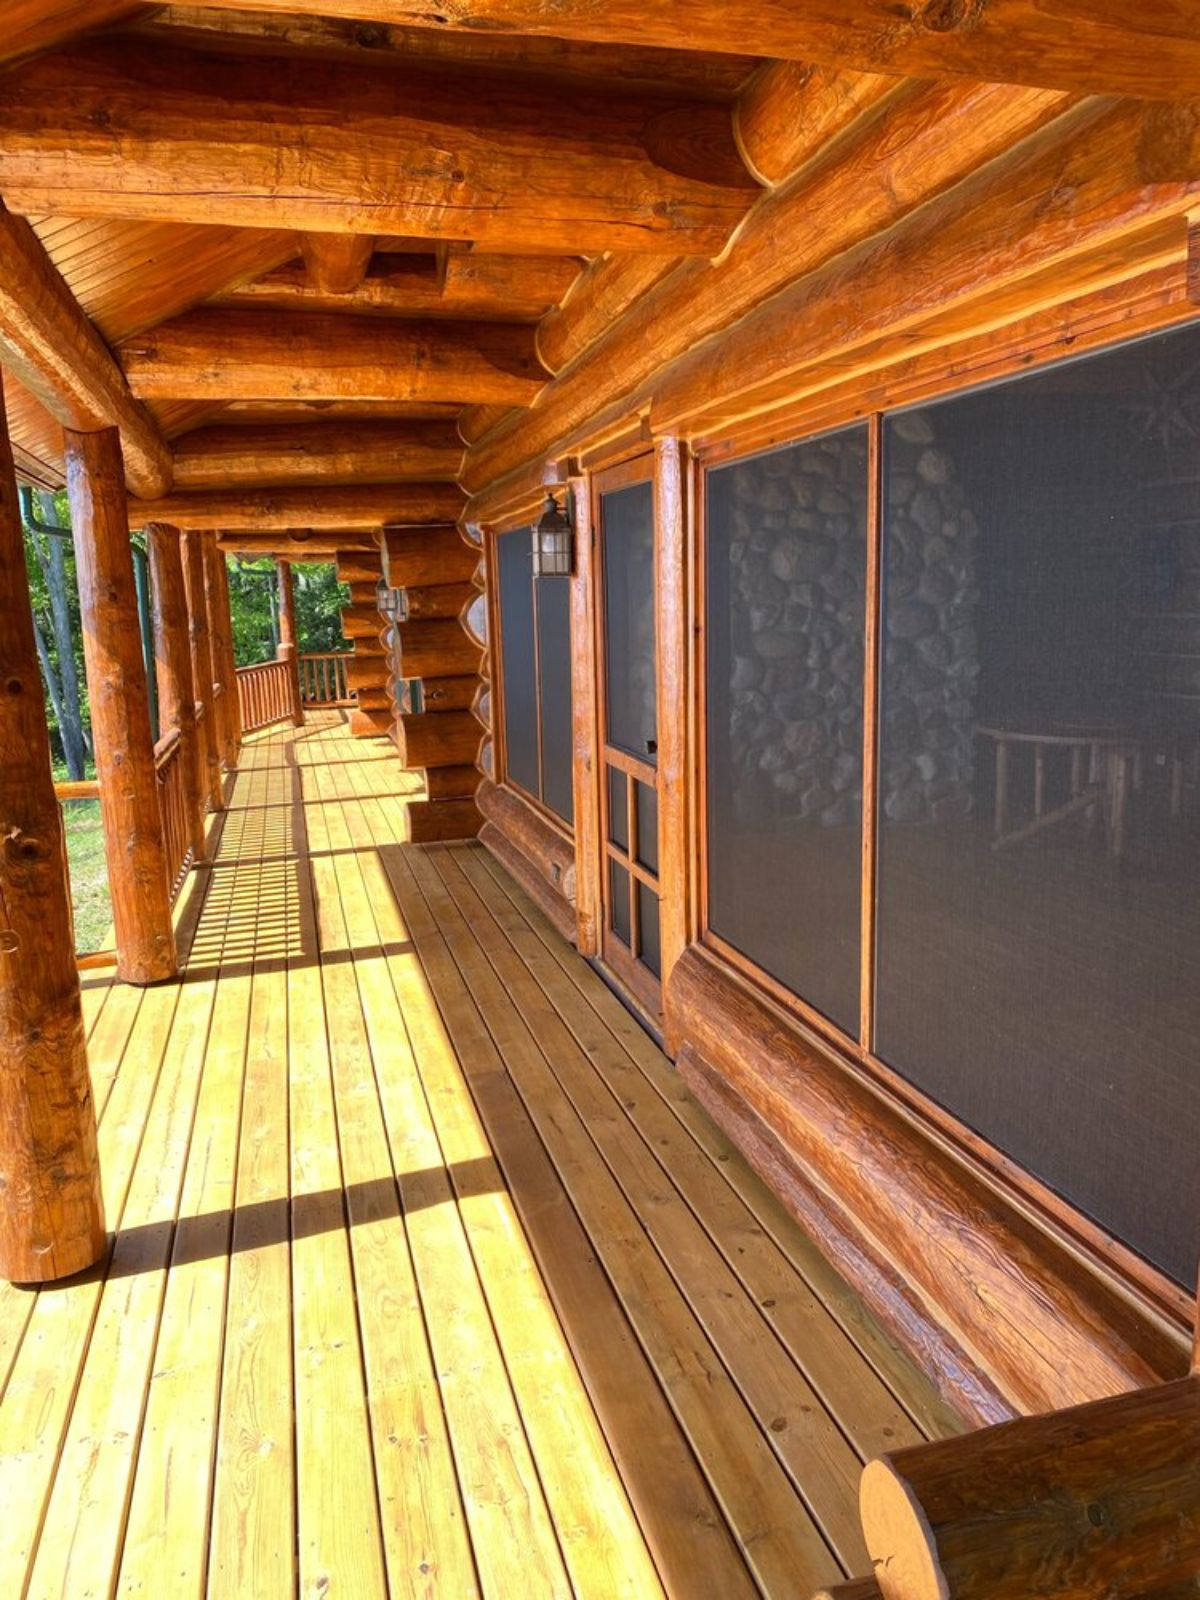 log cabin open porch with wide screens on windows and fresh stain on logs